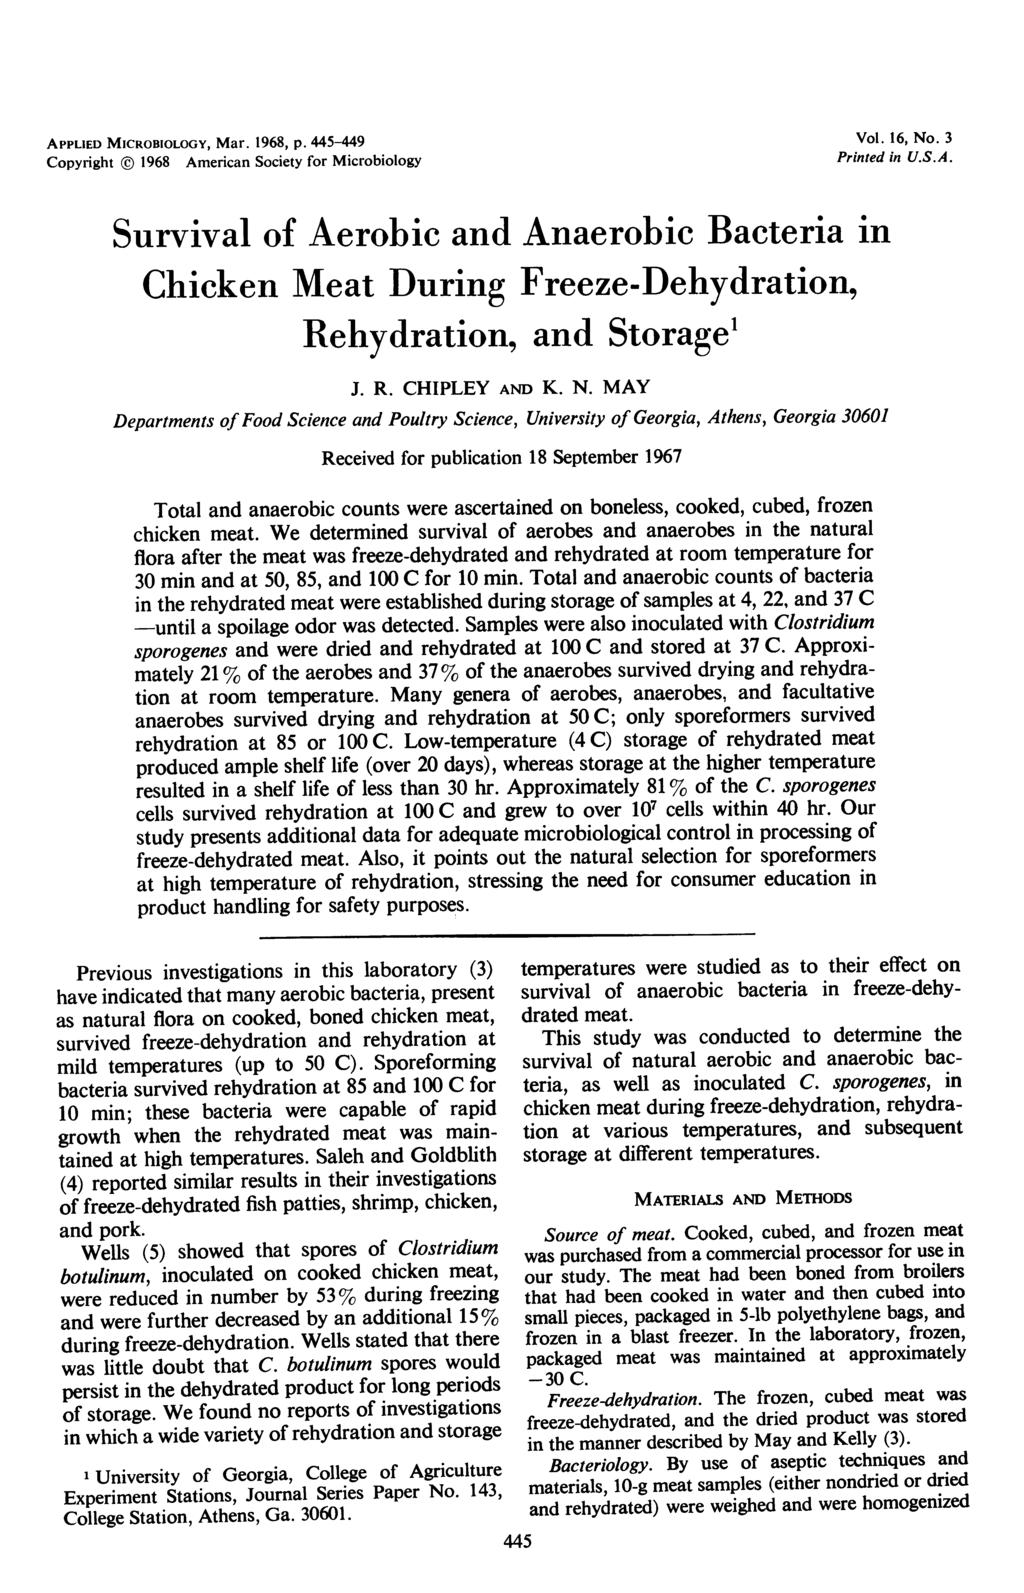 APPLIED MICROBIOLOGY, Mar. 1968, p. 445-449 Copyright 1968 American Society for Microbiology Vol. 16, No. 3 Printed in U.S.A. Survival of Aerobic and Anaerobic Bacteria in Chicken Meat During Freeze-Dehydration, Rehydration, and Storage1 J.